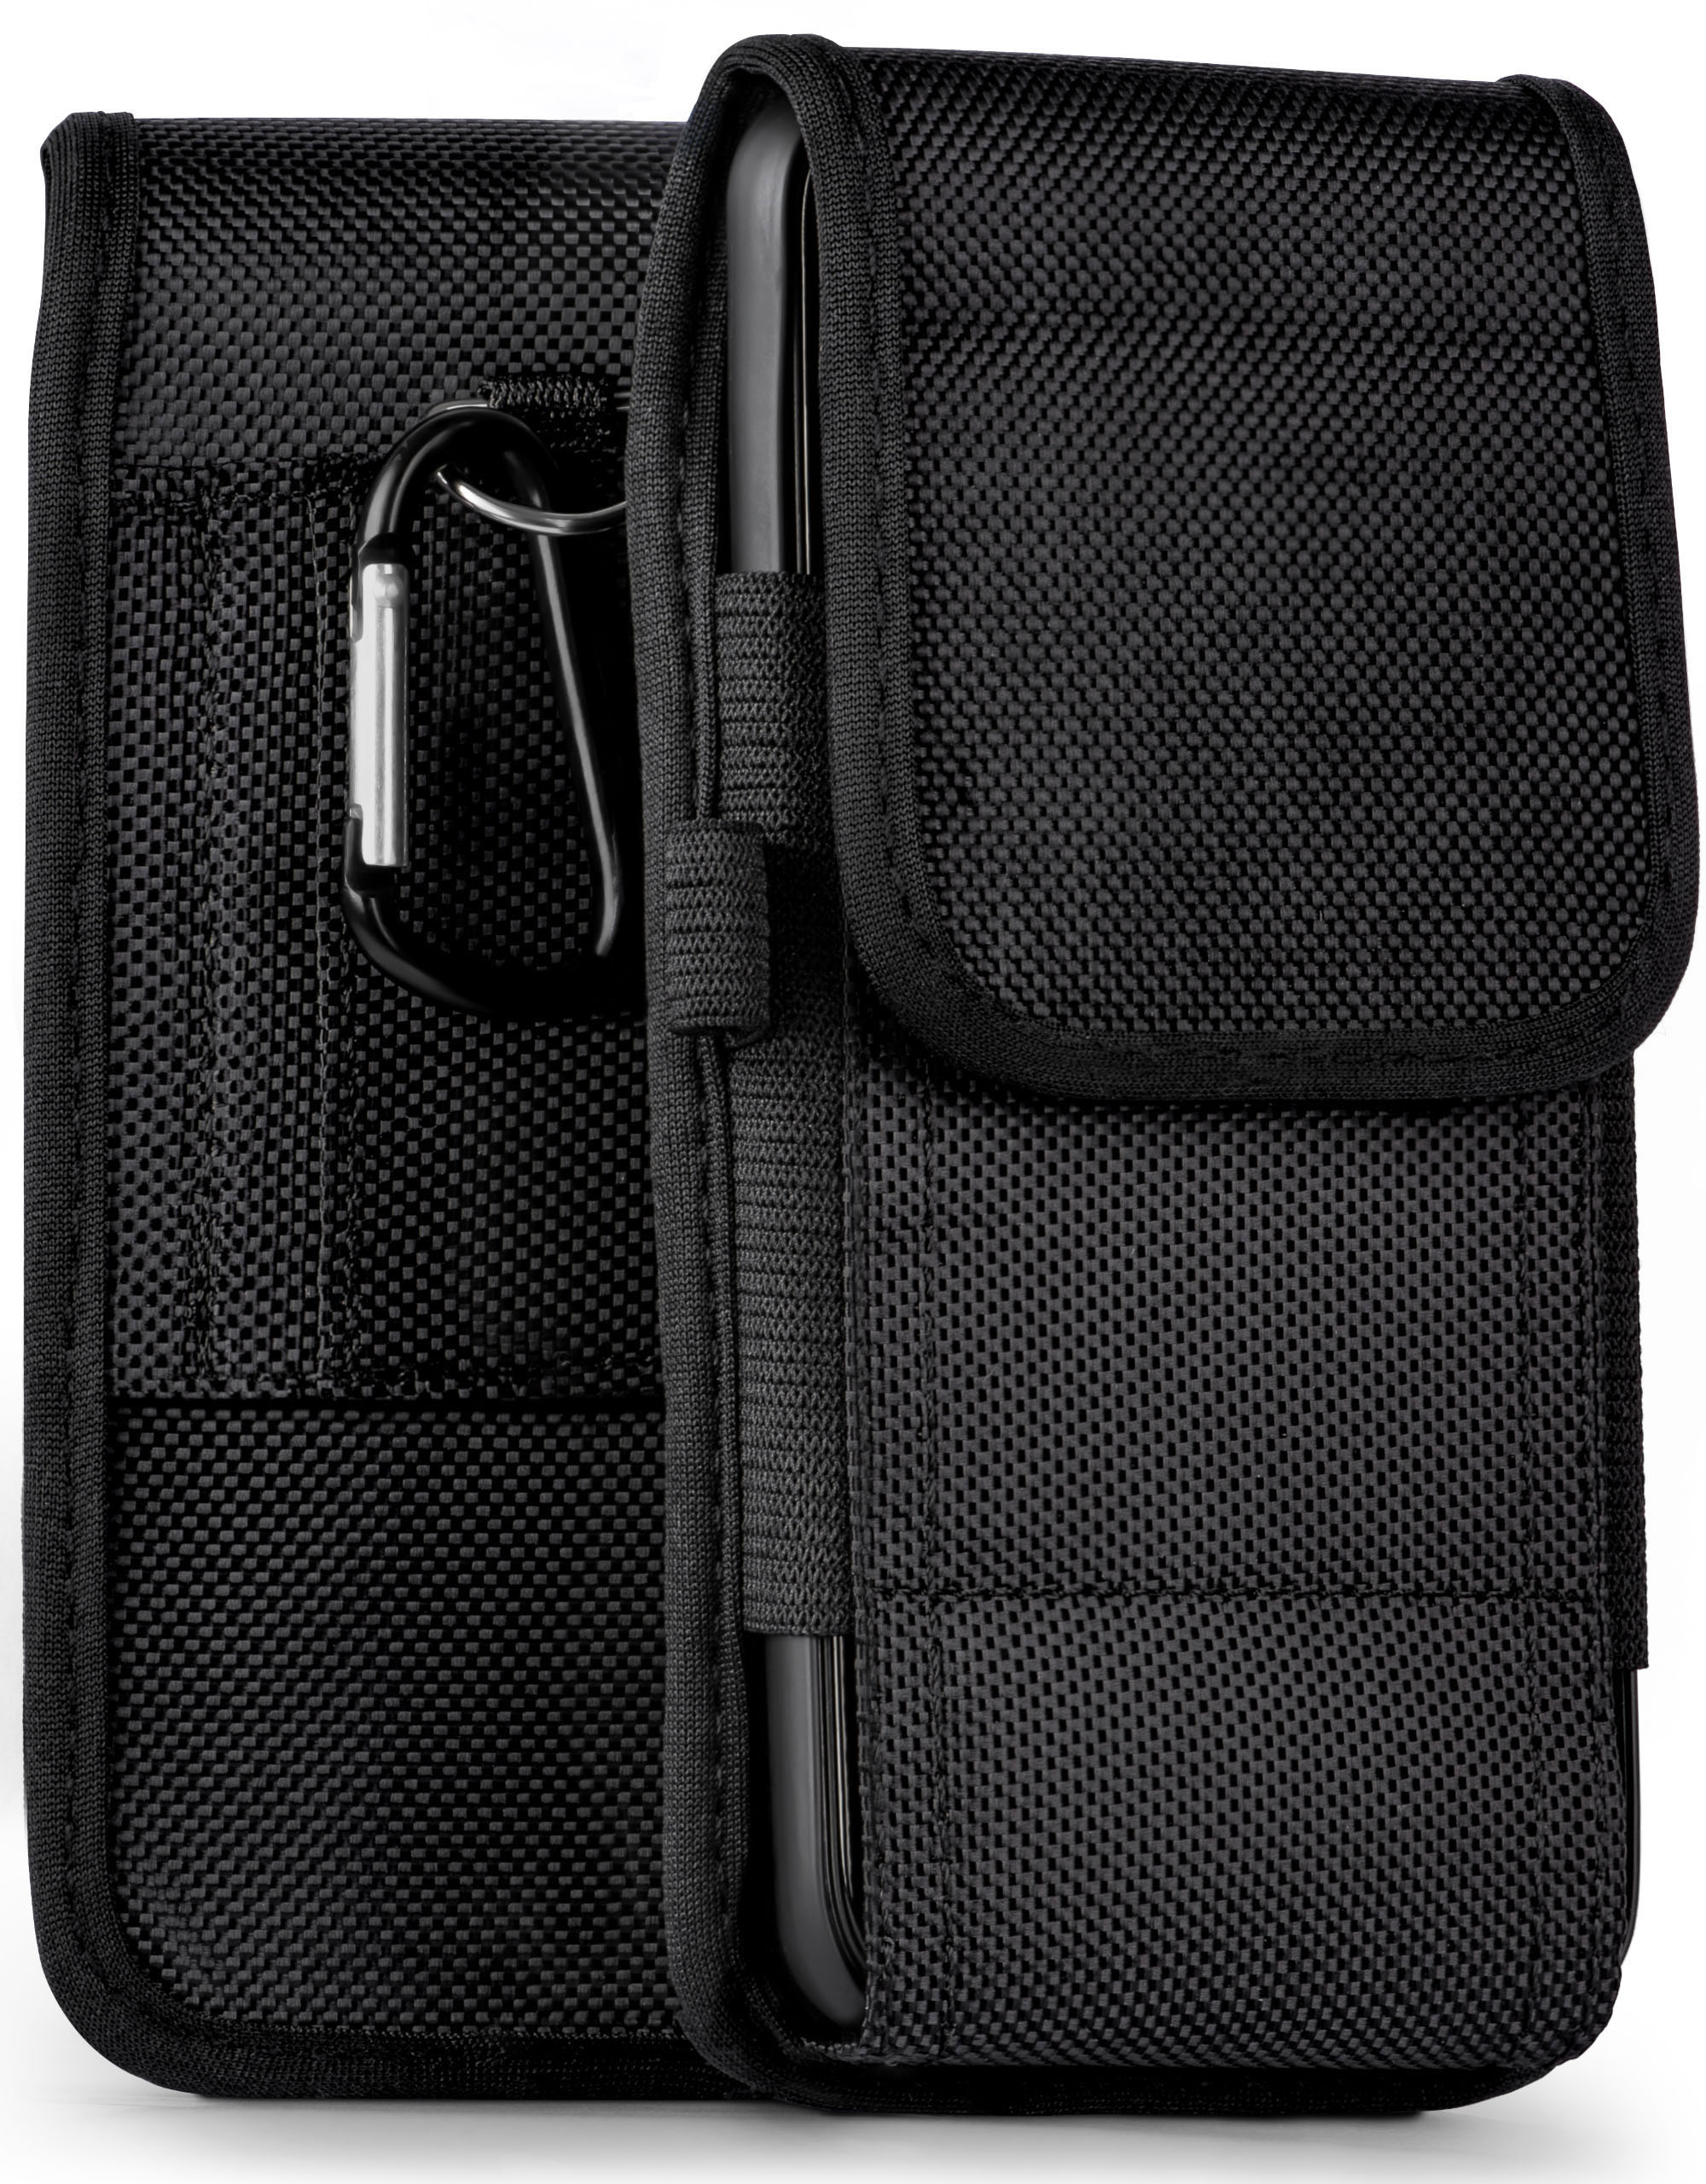 MOEX Agility Case, Xperia Holster, Z3 Trail Compact, Sony